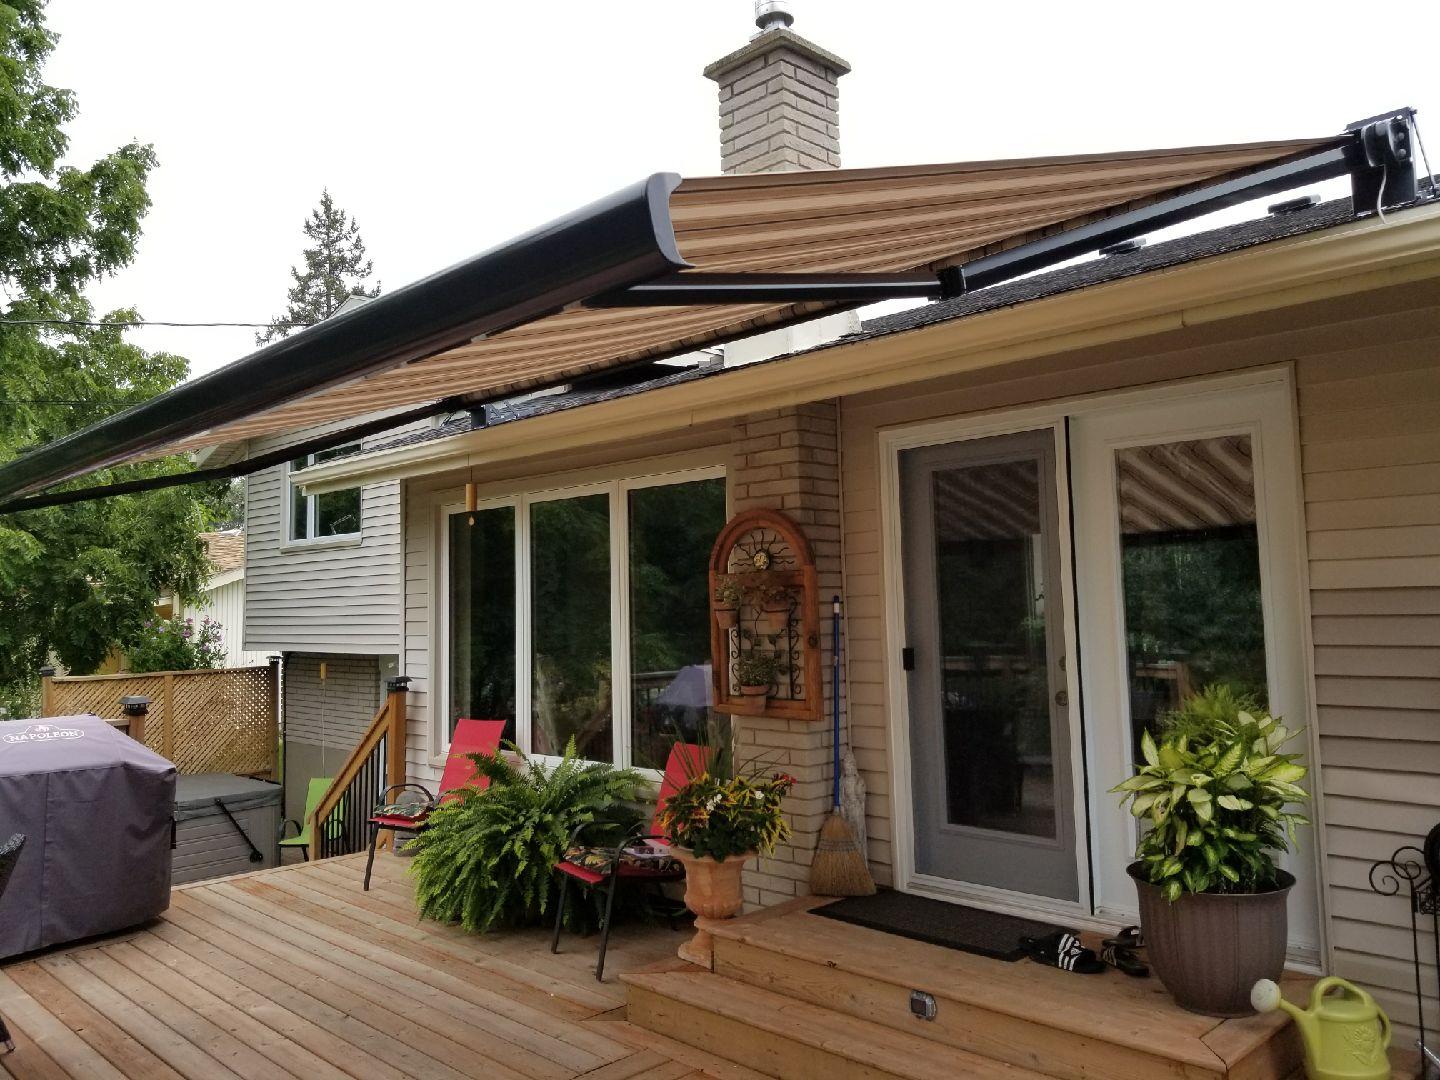 Can a Sunsetter Awning Be Installed on a Roof?